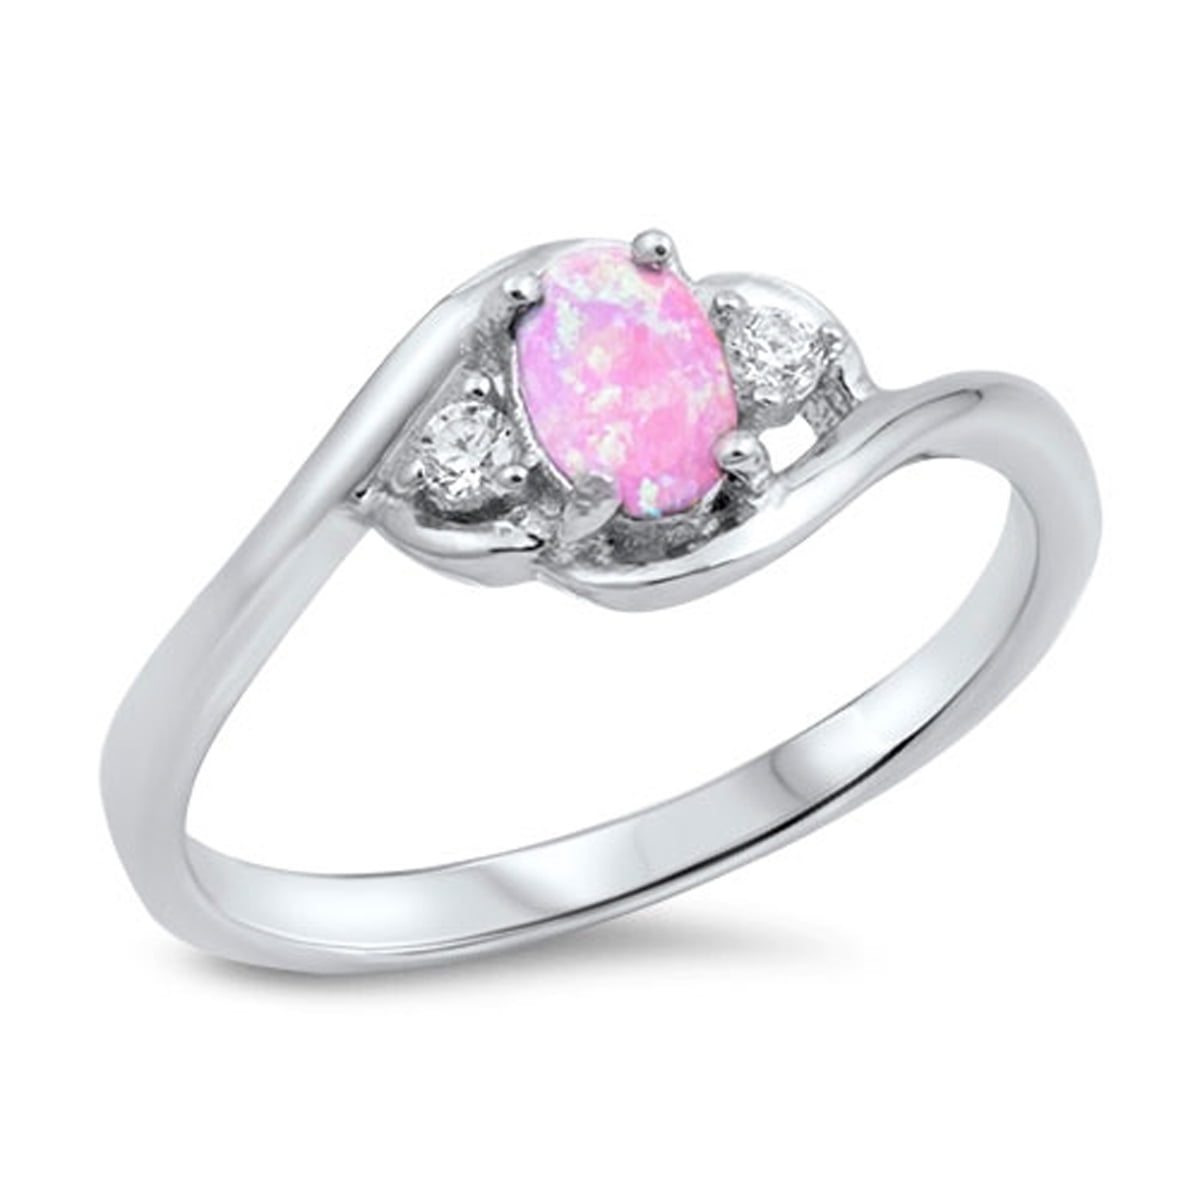 Sizes 4-10 Sterling Silver Women's Pink Simulated Opal Stackable Wedding Ring